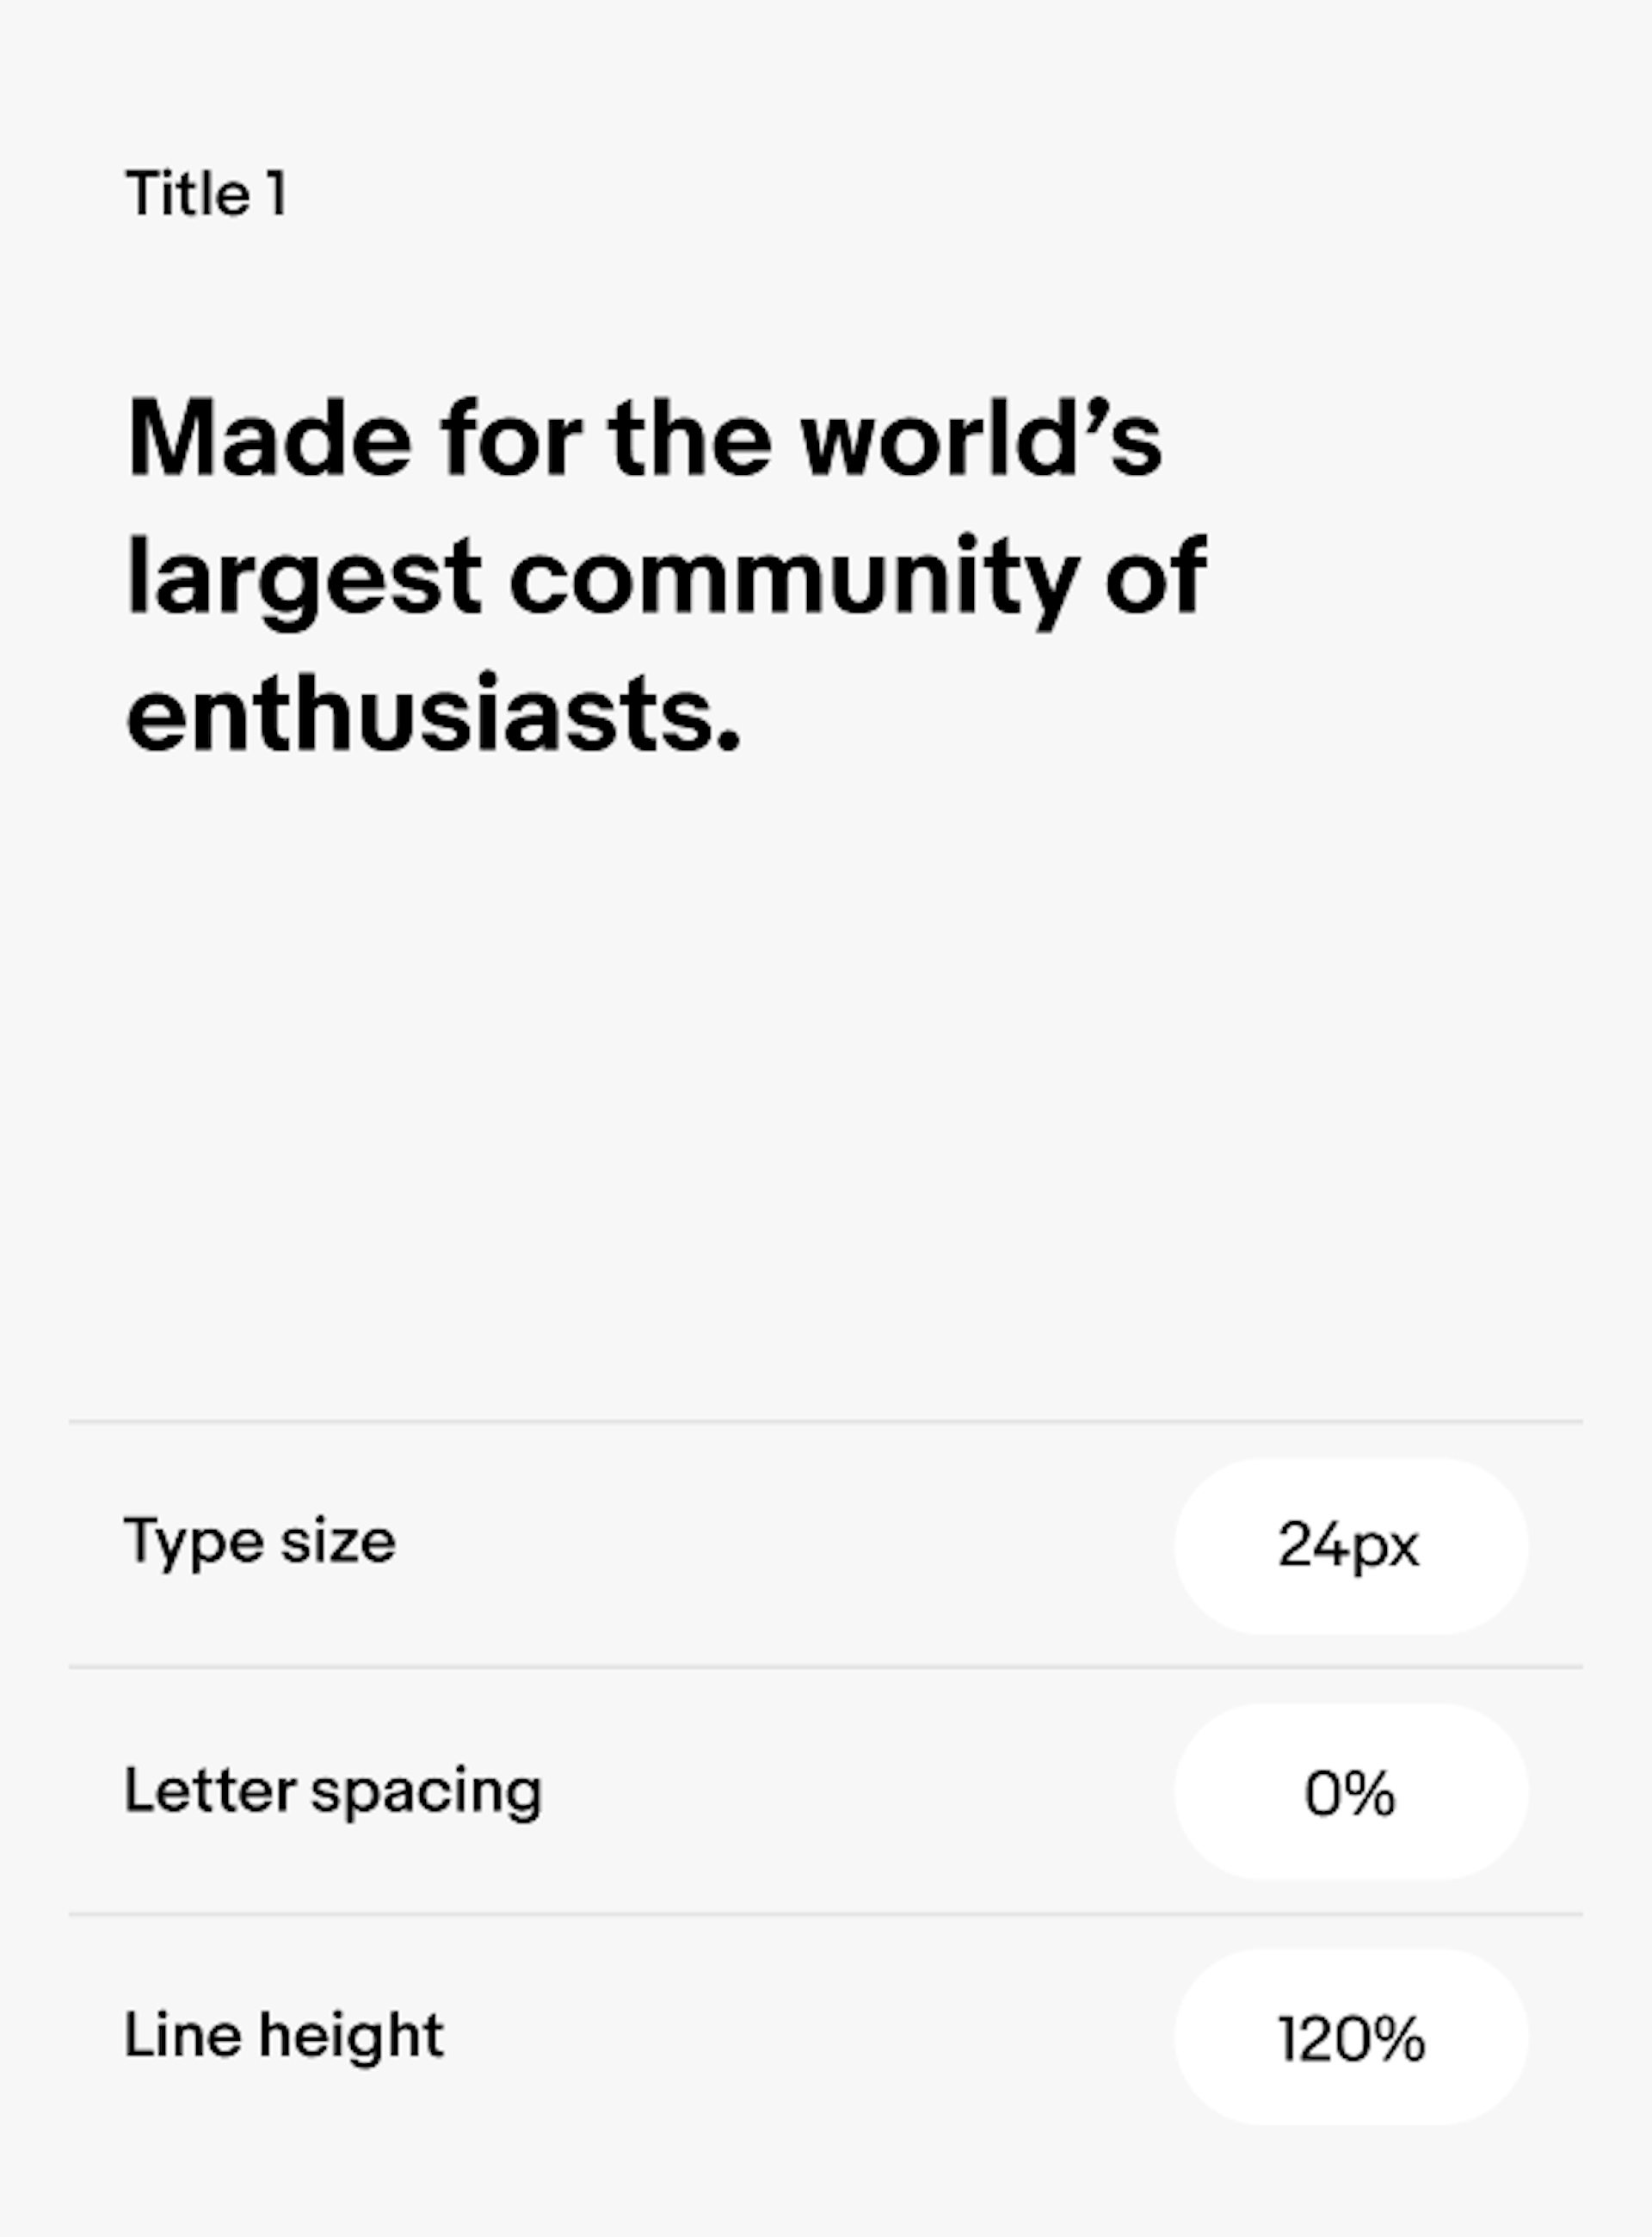 Title 1 example text: 'Made for the world's largest community of enthusiasts.' Title 3 has type size 24px, letter spacing 0%, line height 120%. 